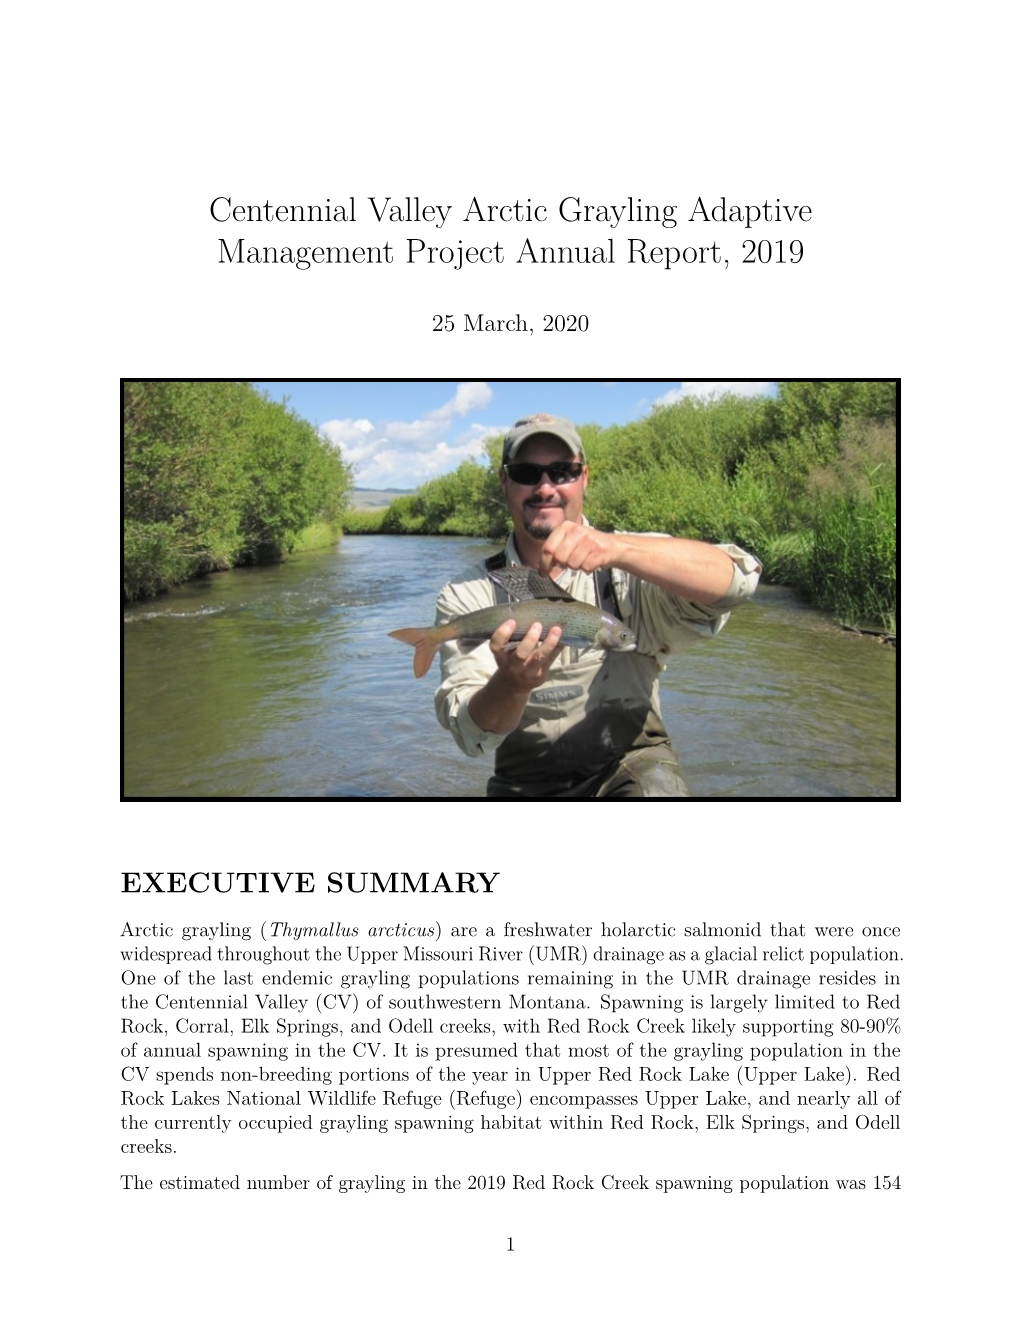 Centennial Valley Arctic Grayling Adaptive Management Project Annual Report, 2019